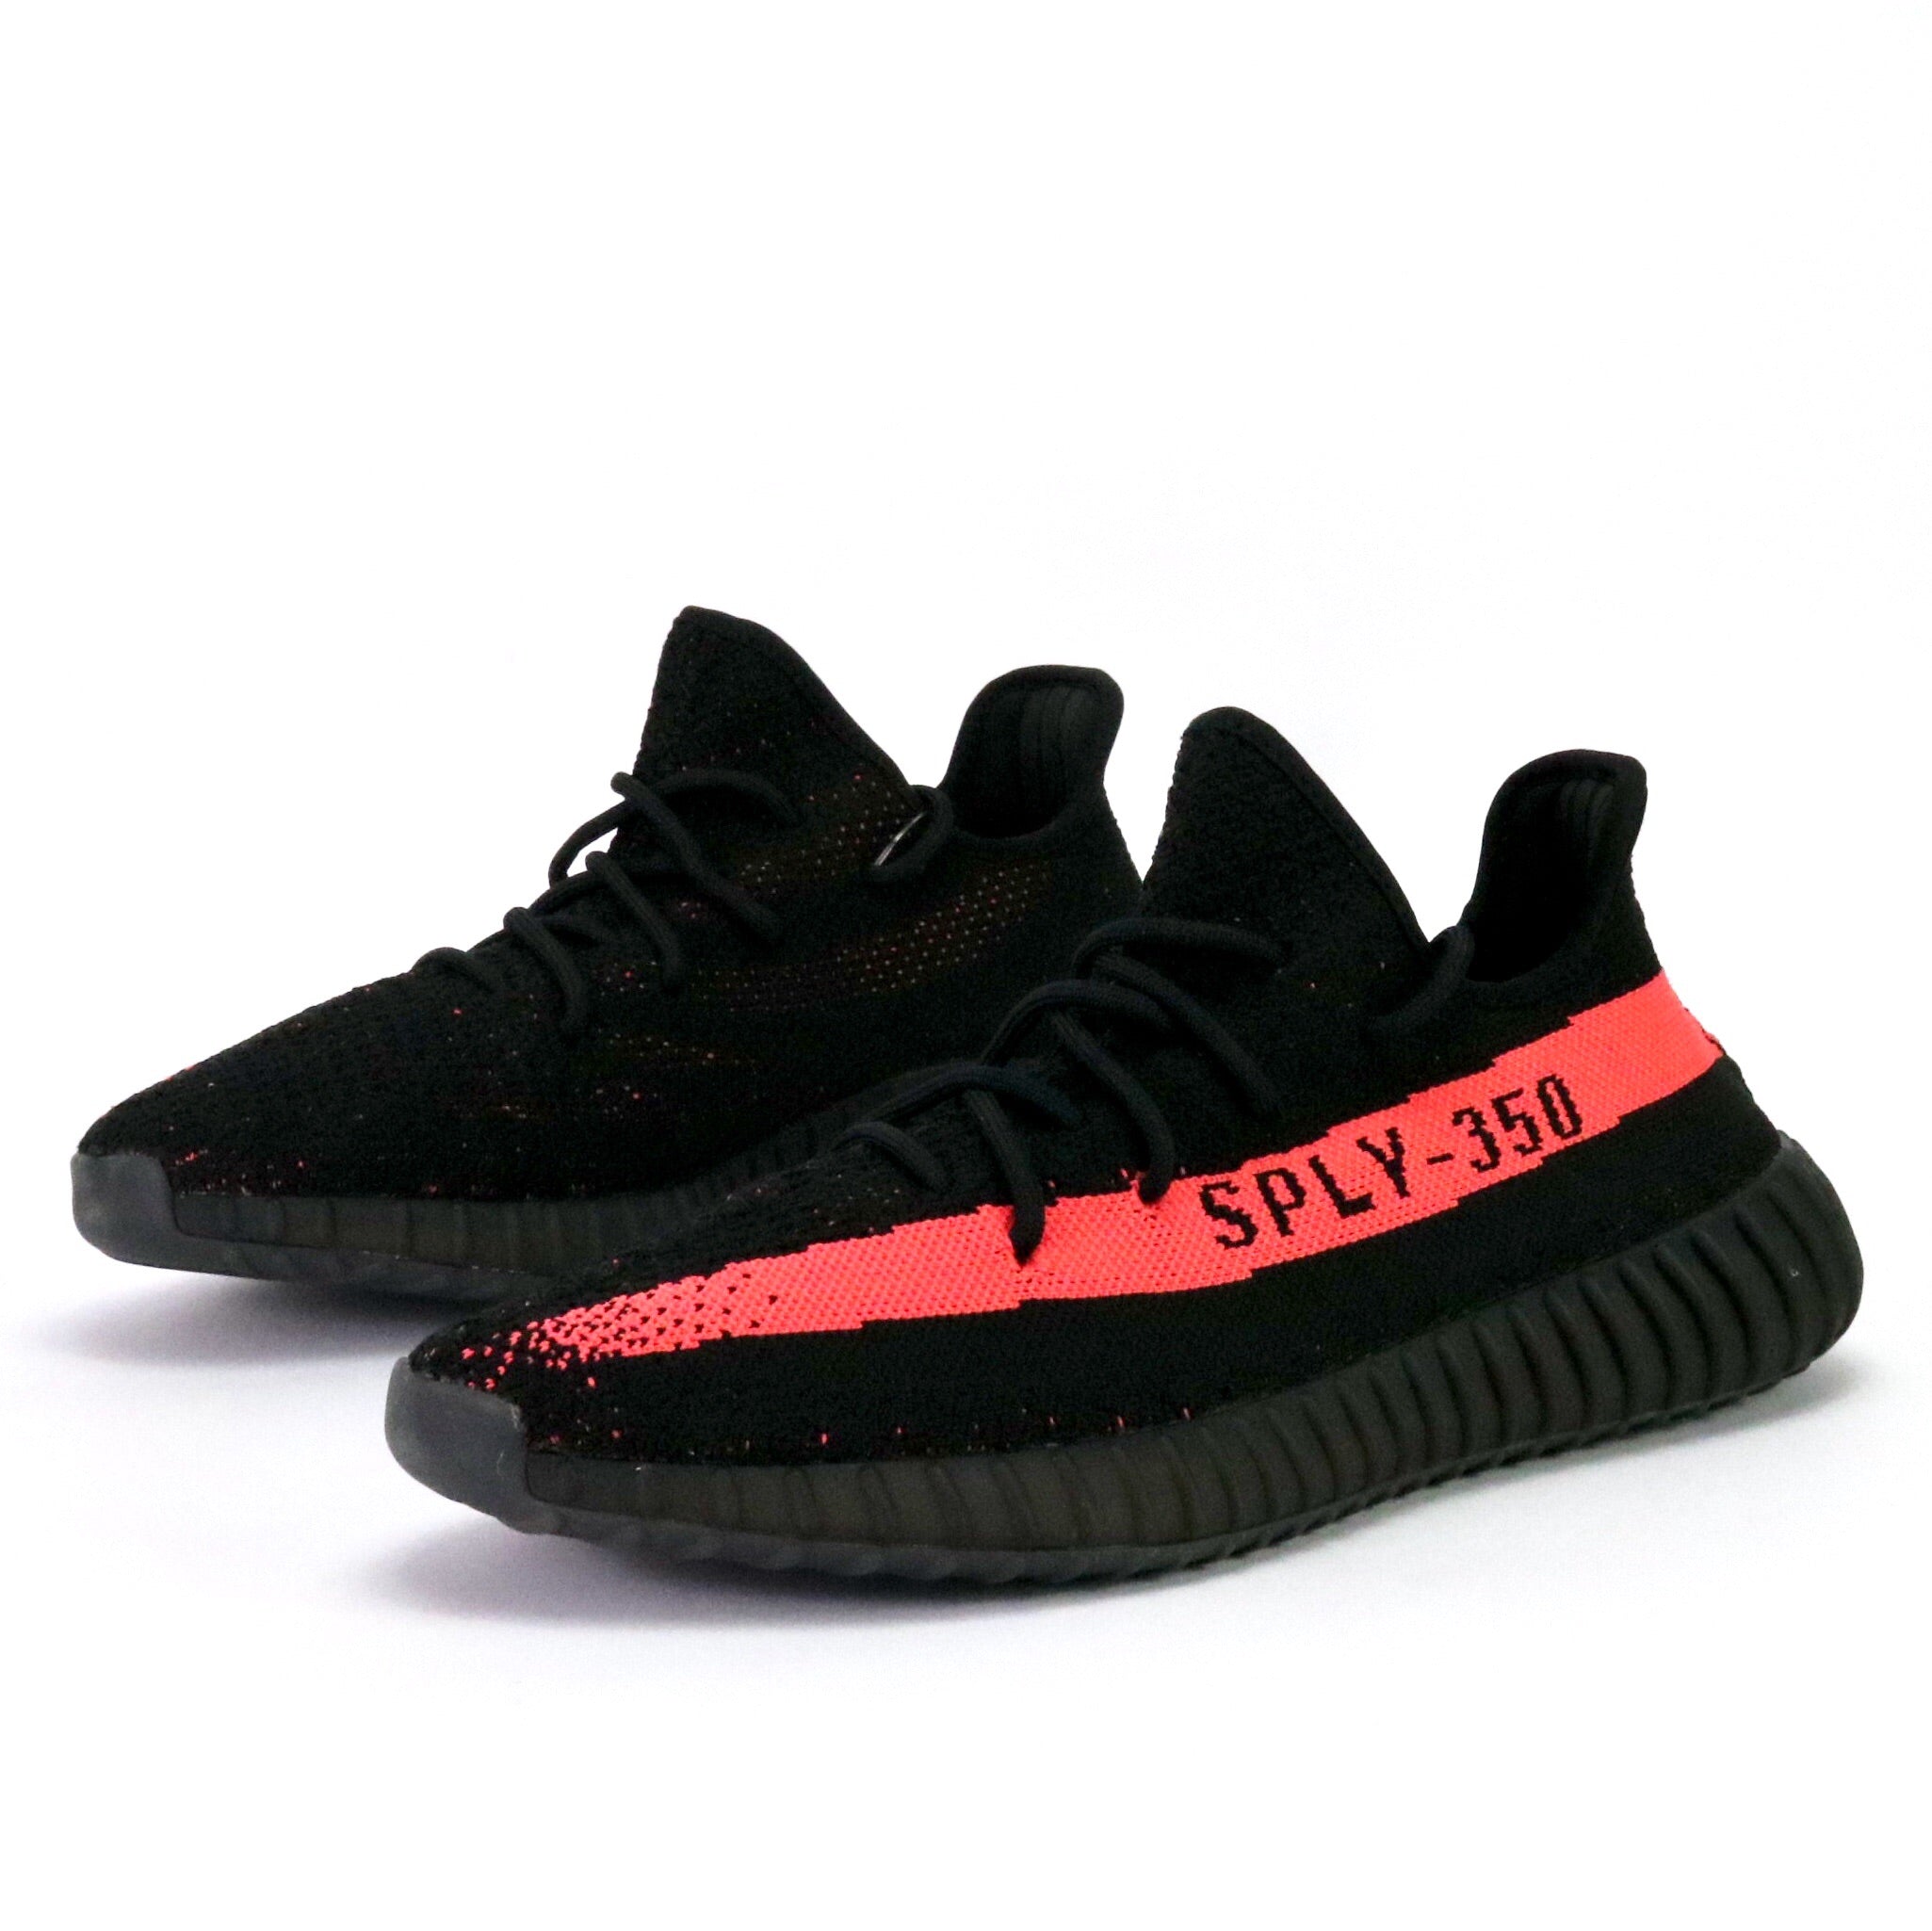 Adidas Yeezy Boost 350 Core Black Red Pink Core Black SoleMate Sneakers